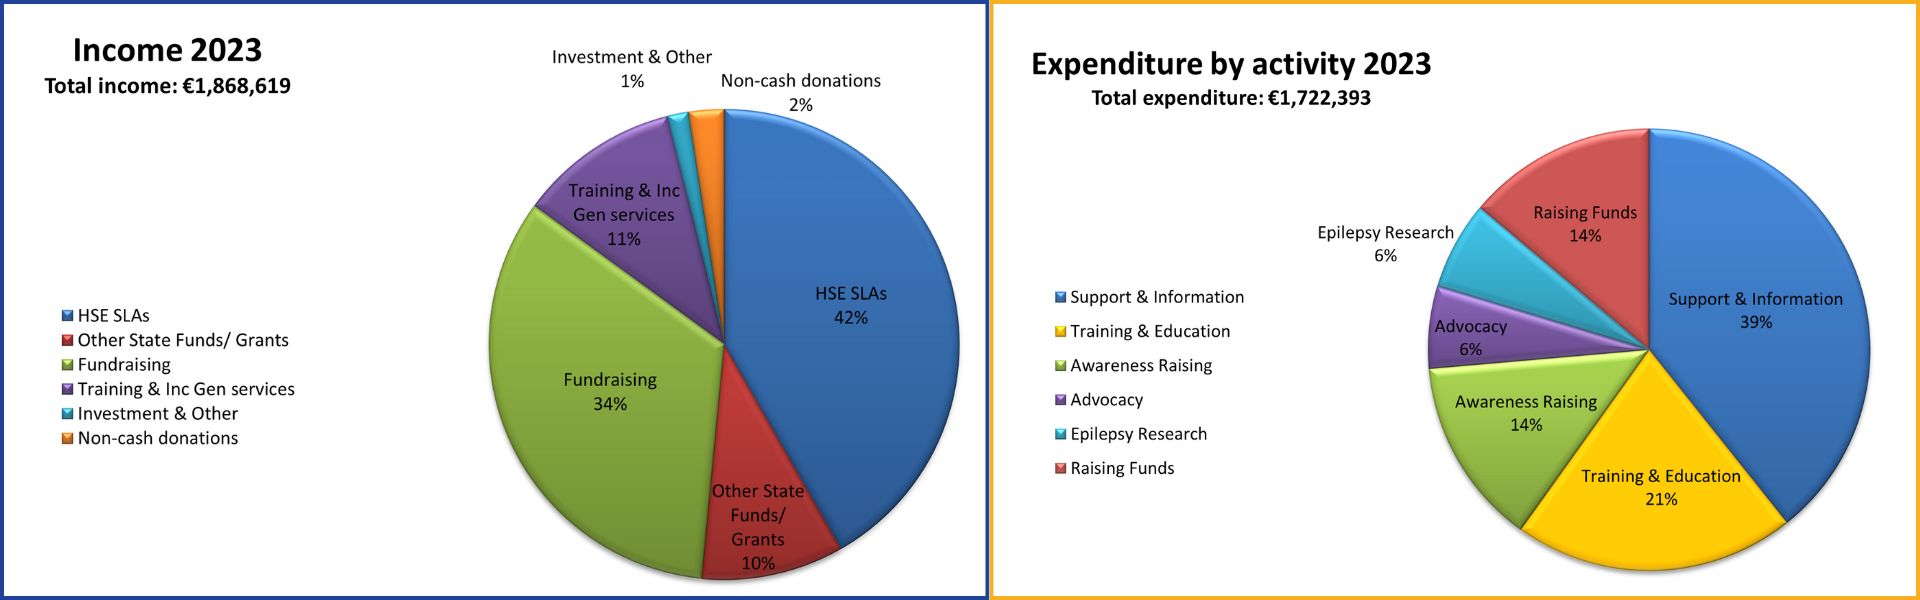 Chart showing income and expenditure